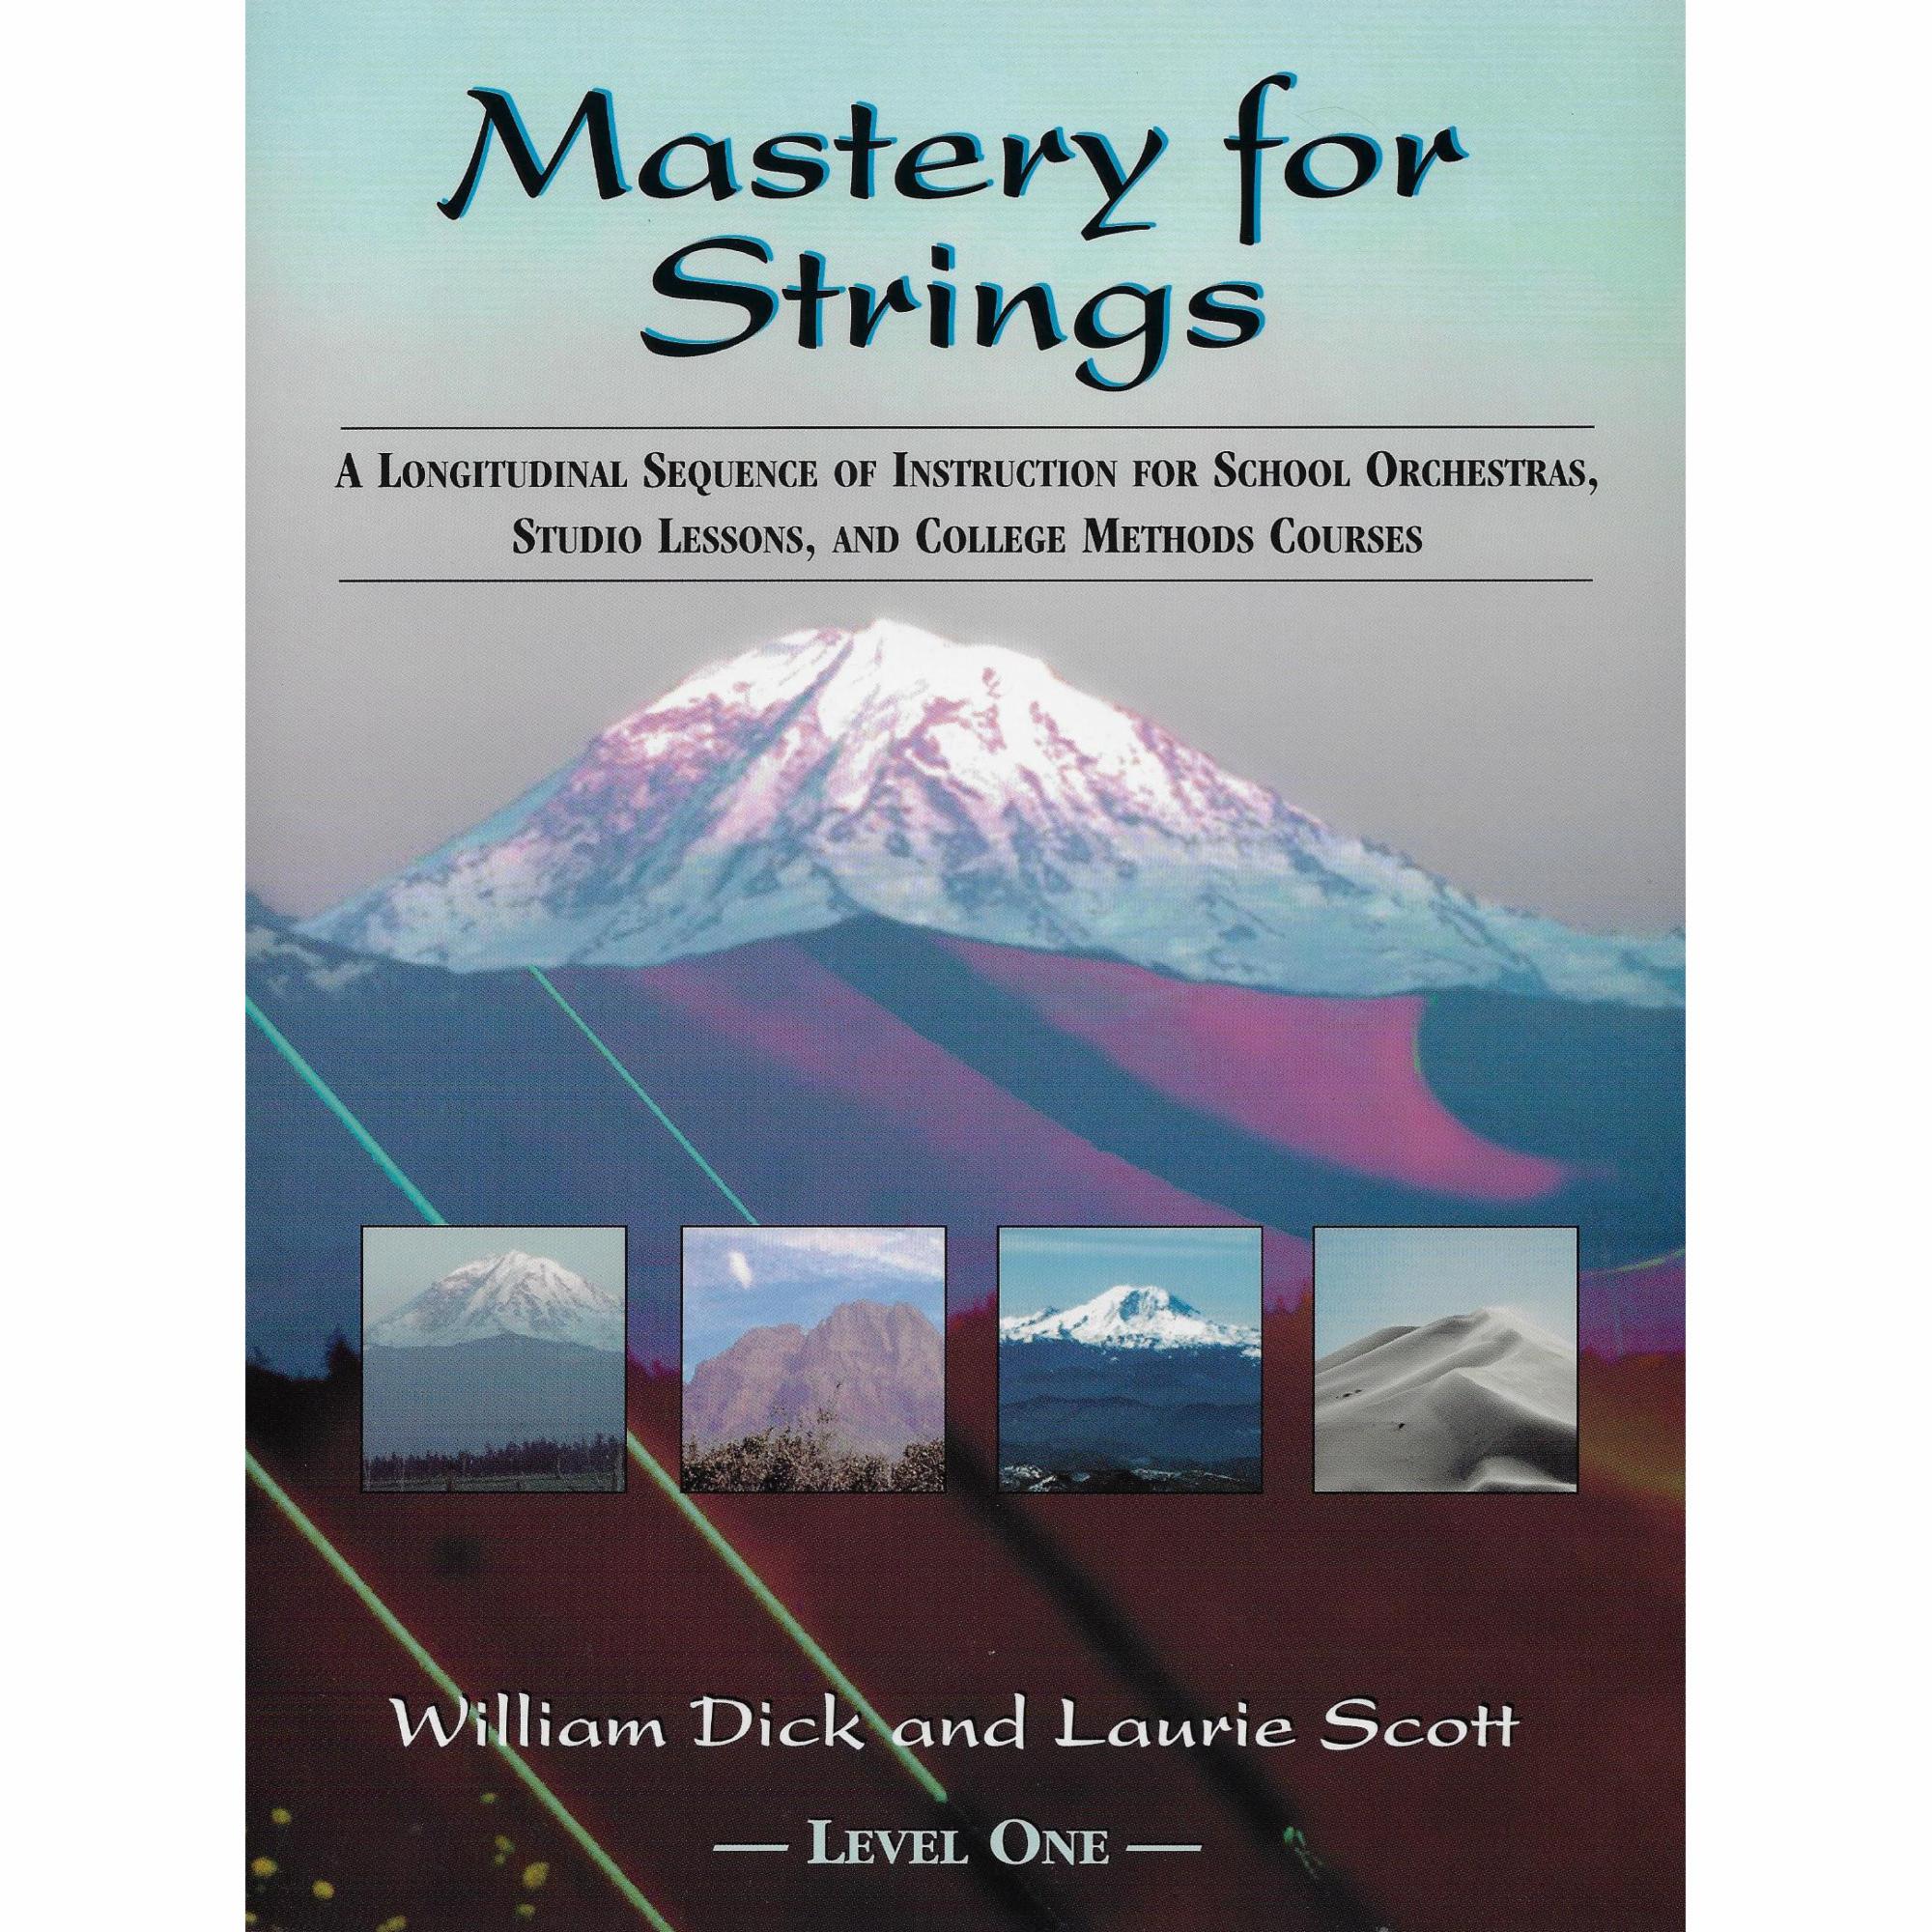 Mastery for Strings, Level One